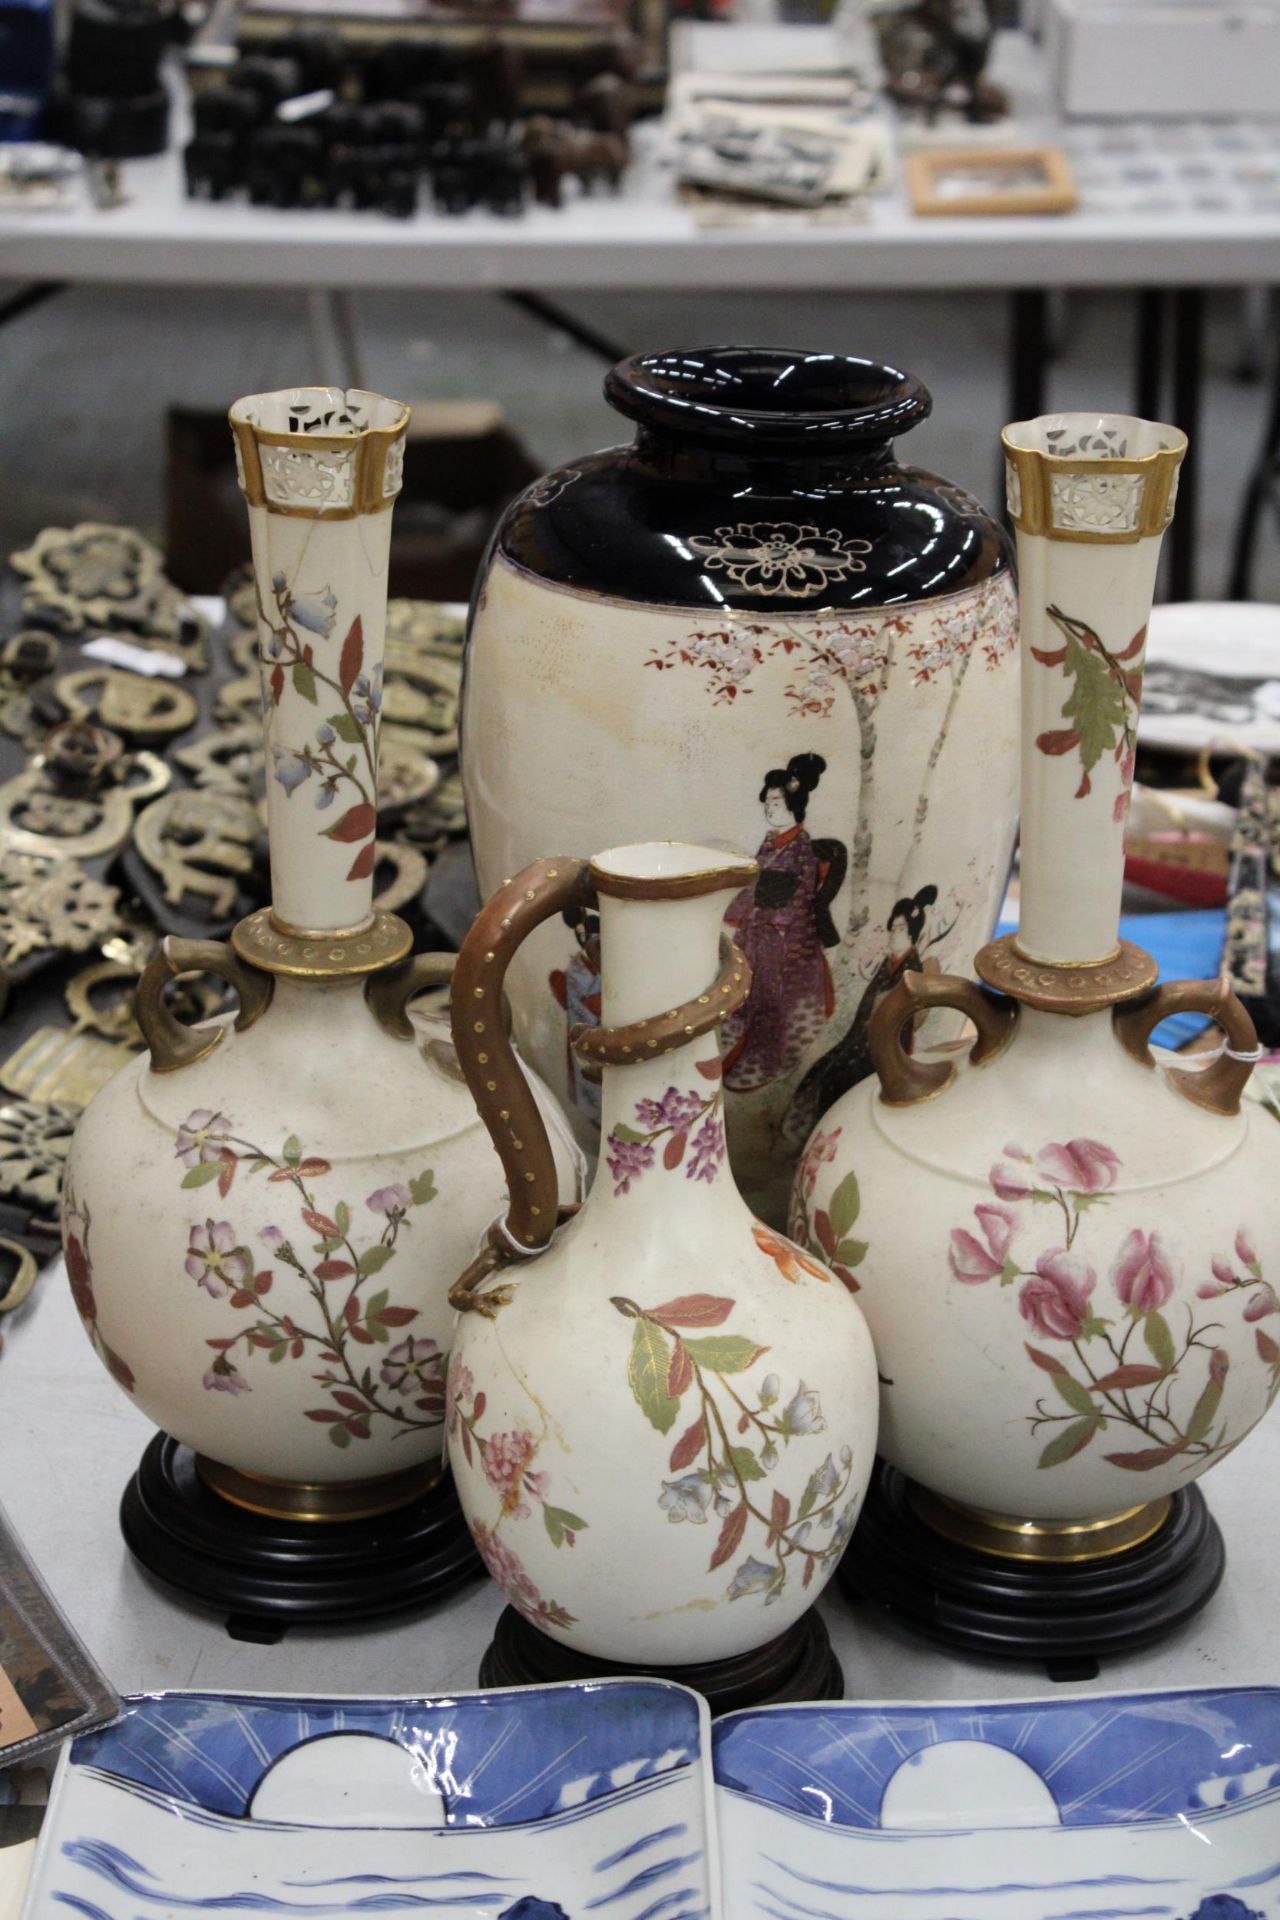 THREE PIECES OF ROYAL WORCESTER, BLUSH IVORY VASES, ONE WITH LIZARD HANDLE - ALL A/F, PLUS A LARGE